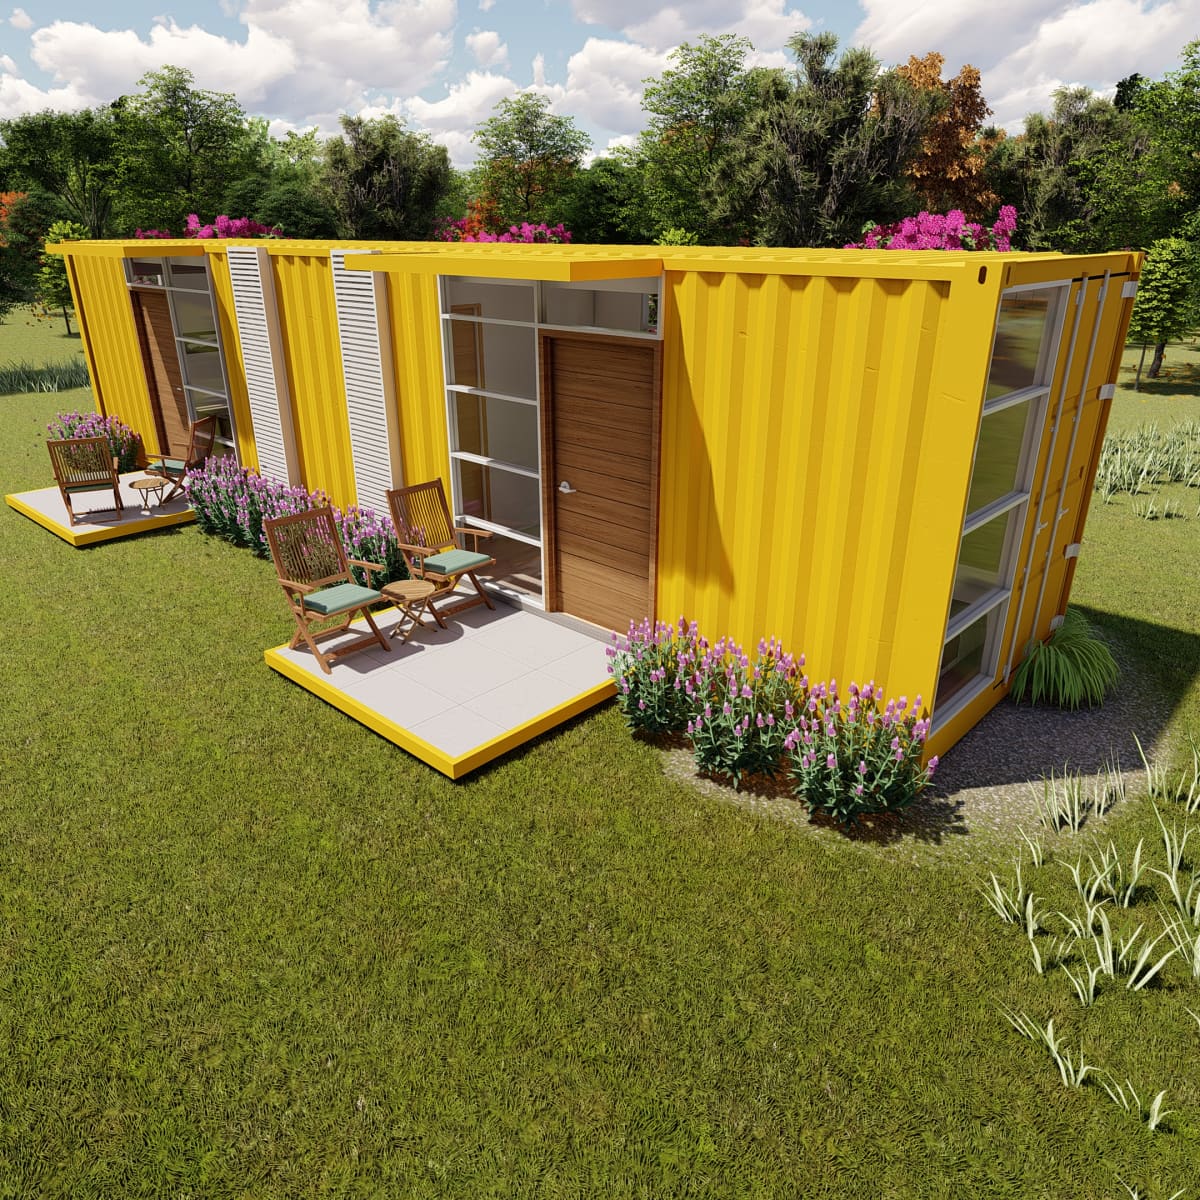 Outside the box: Shipping containers take on new life as homes, businesses  in South Florida